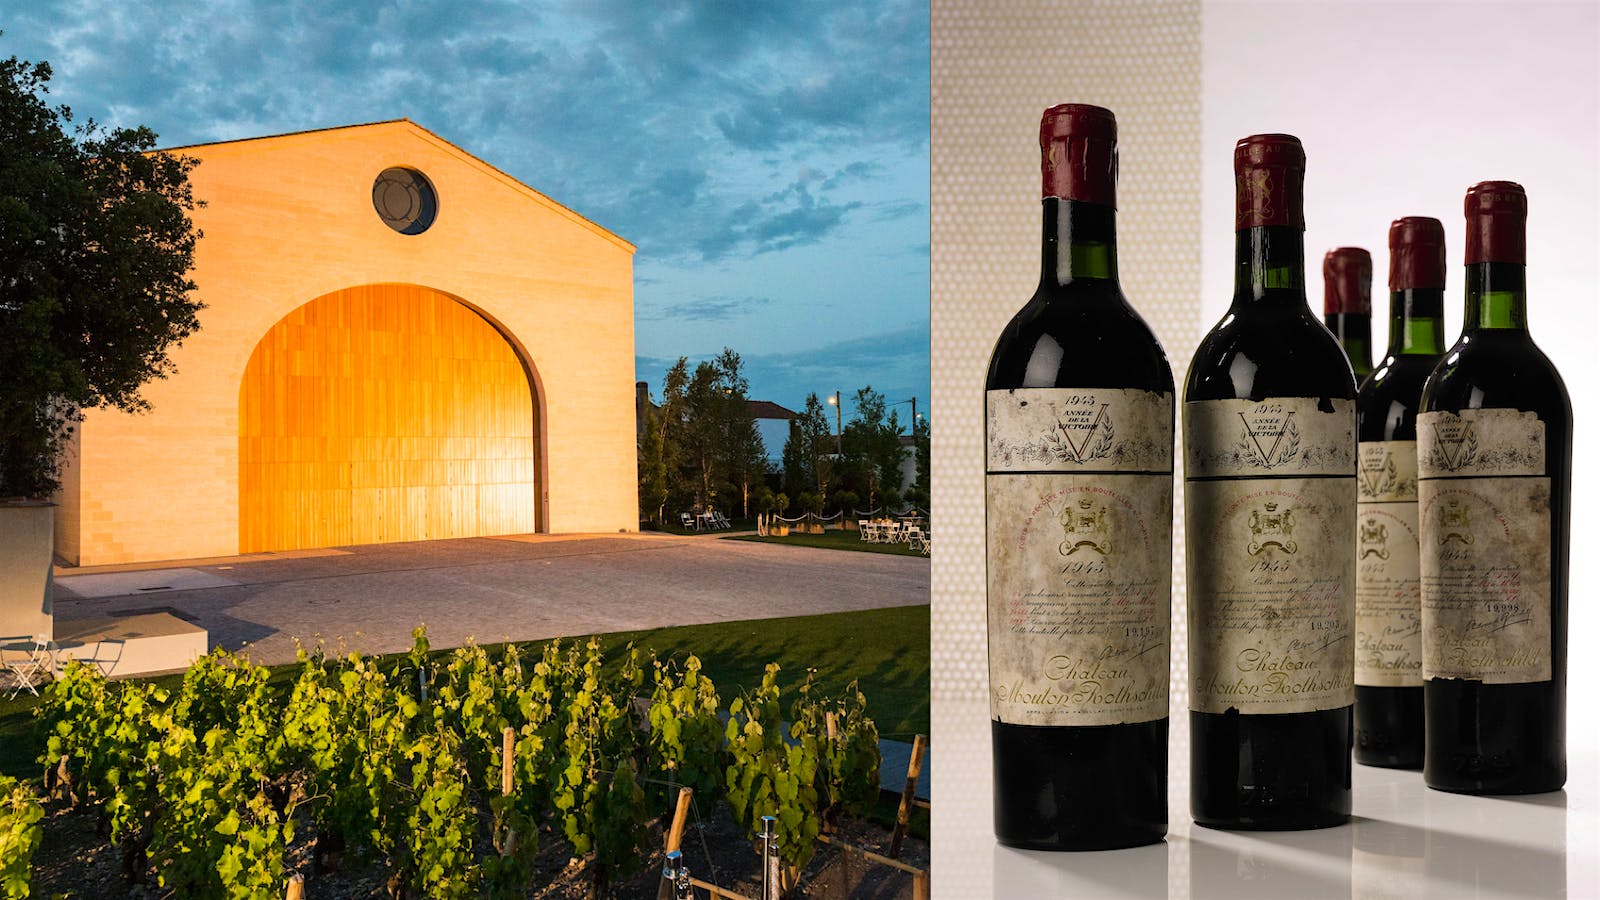 Château Mouton-Rothschild winery in Bordeaux reflects the sunset